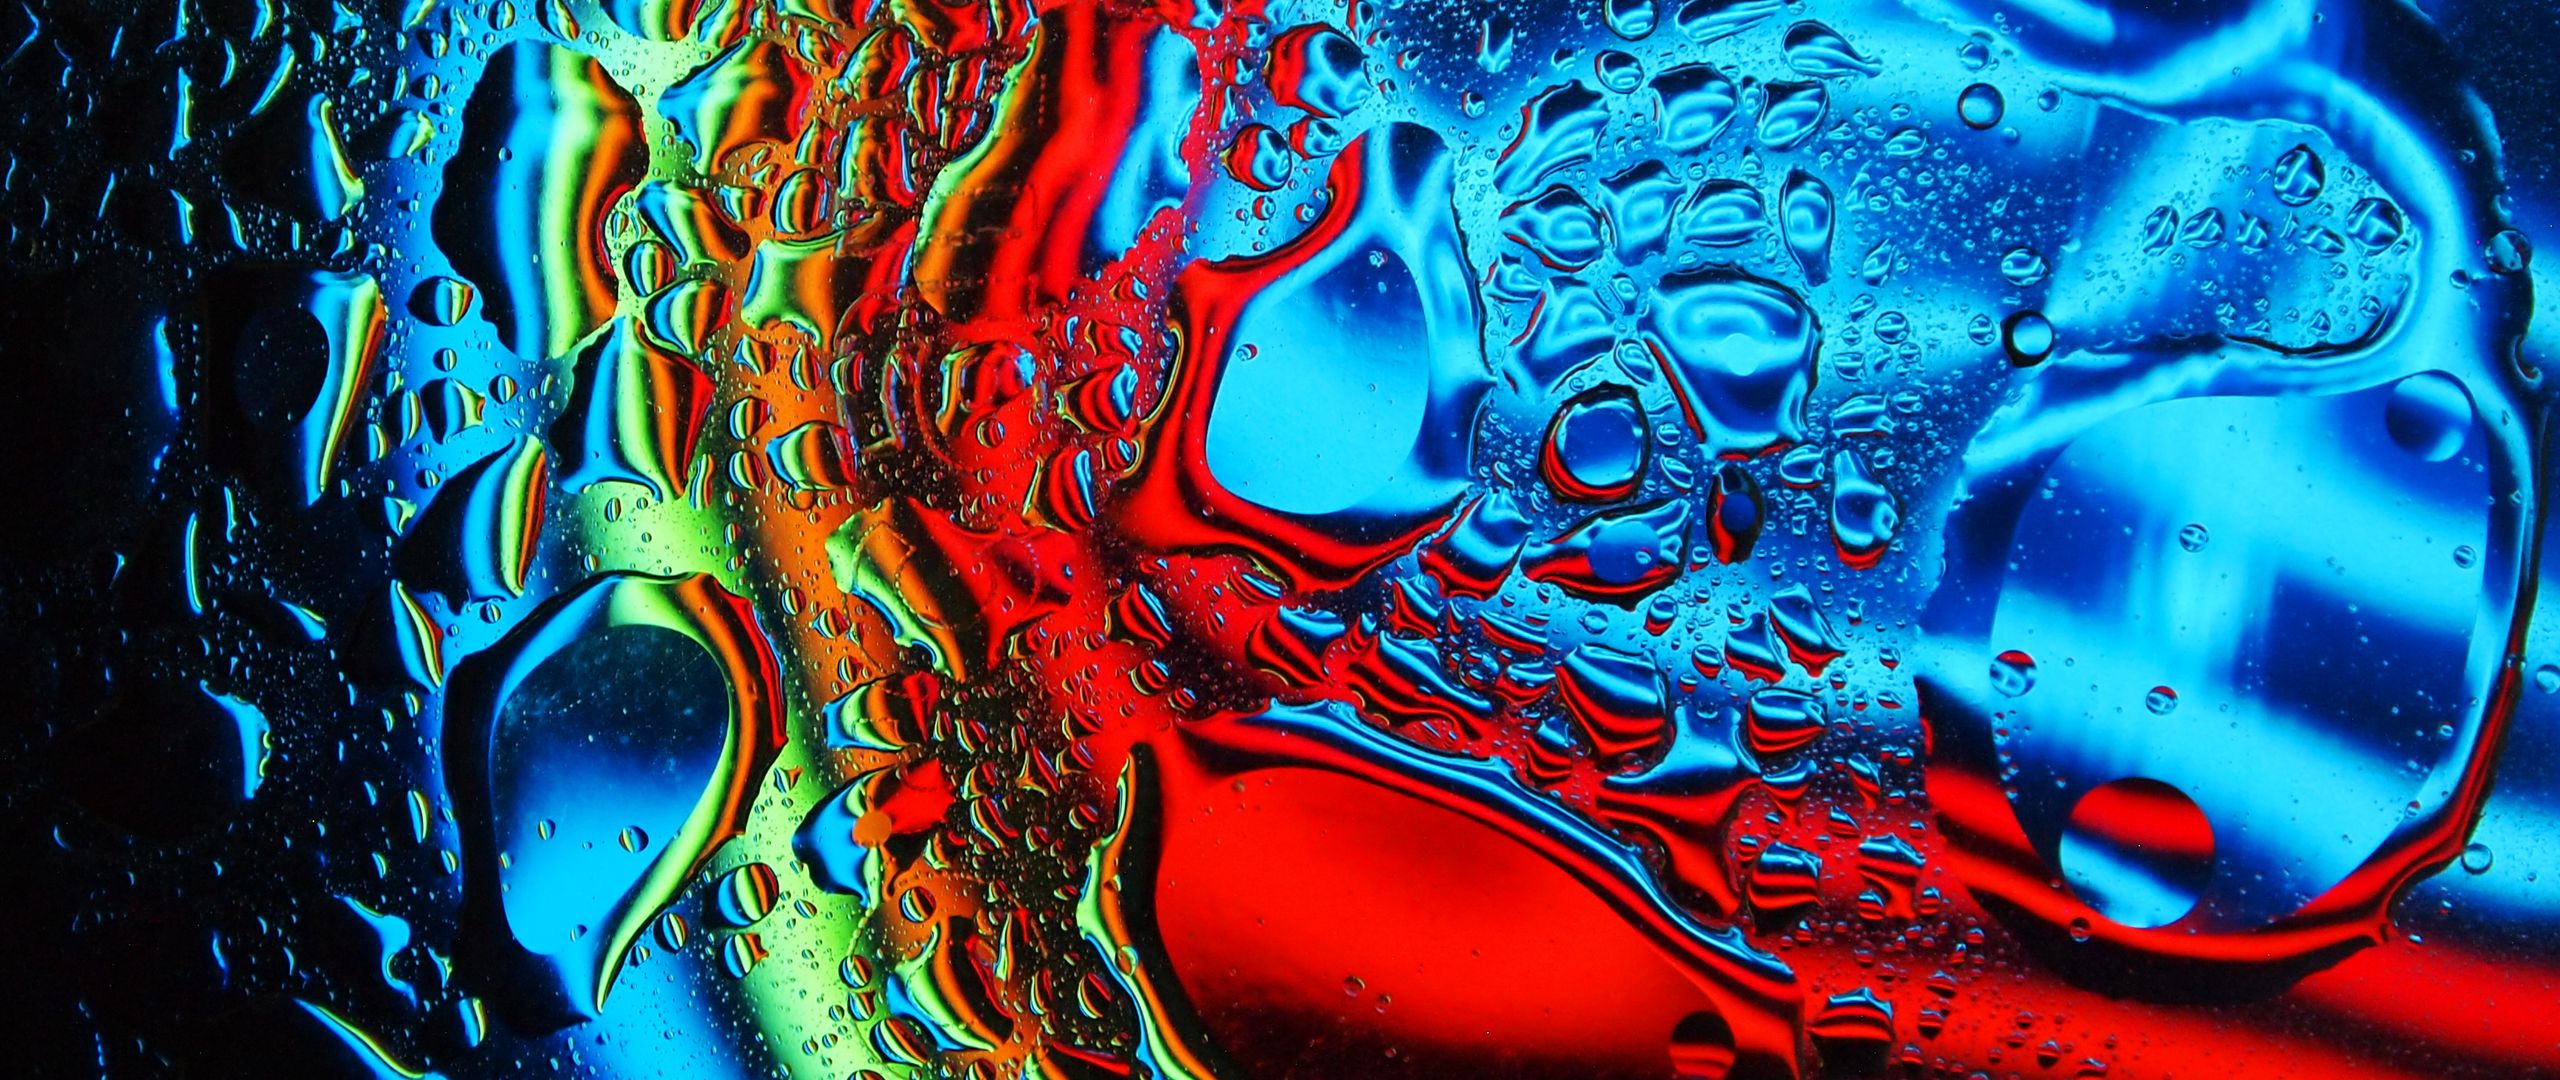 Wallpaper Drops of colored water